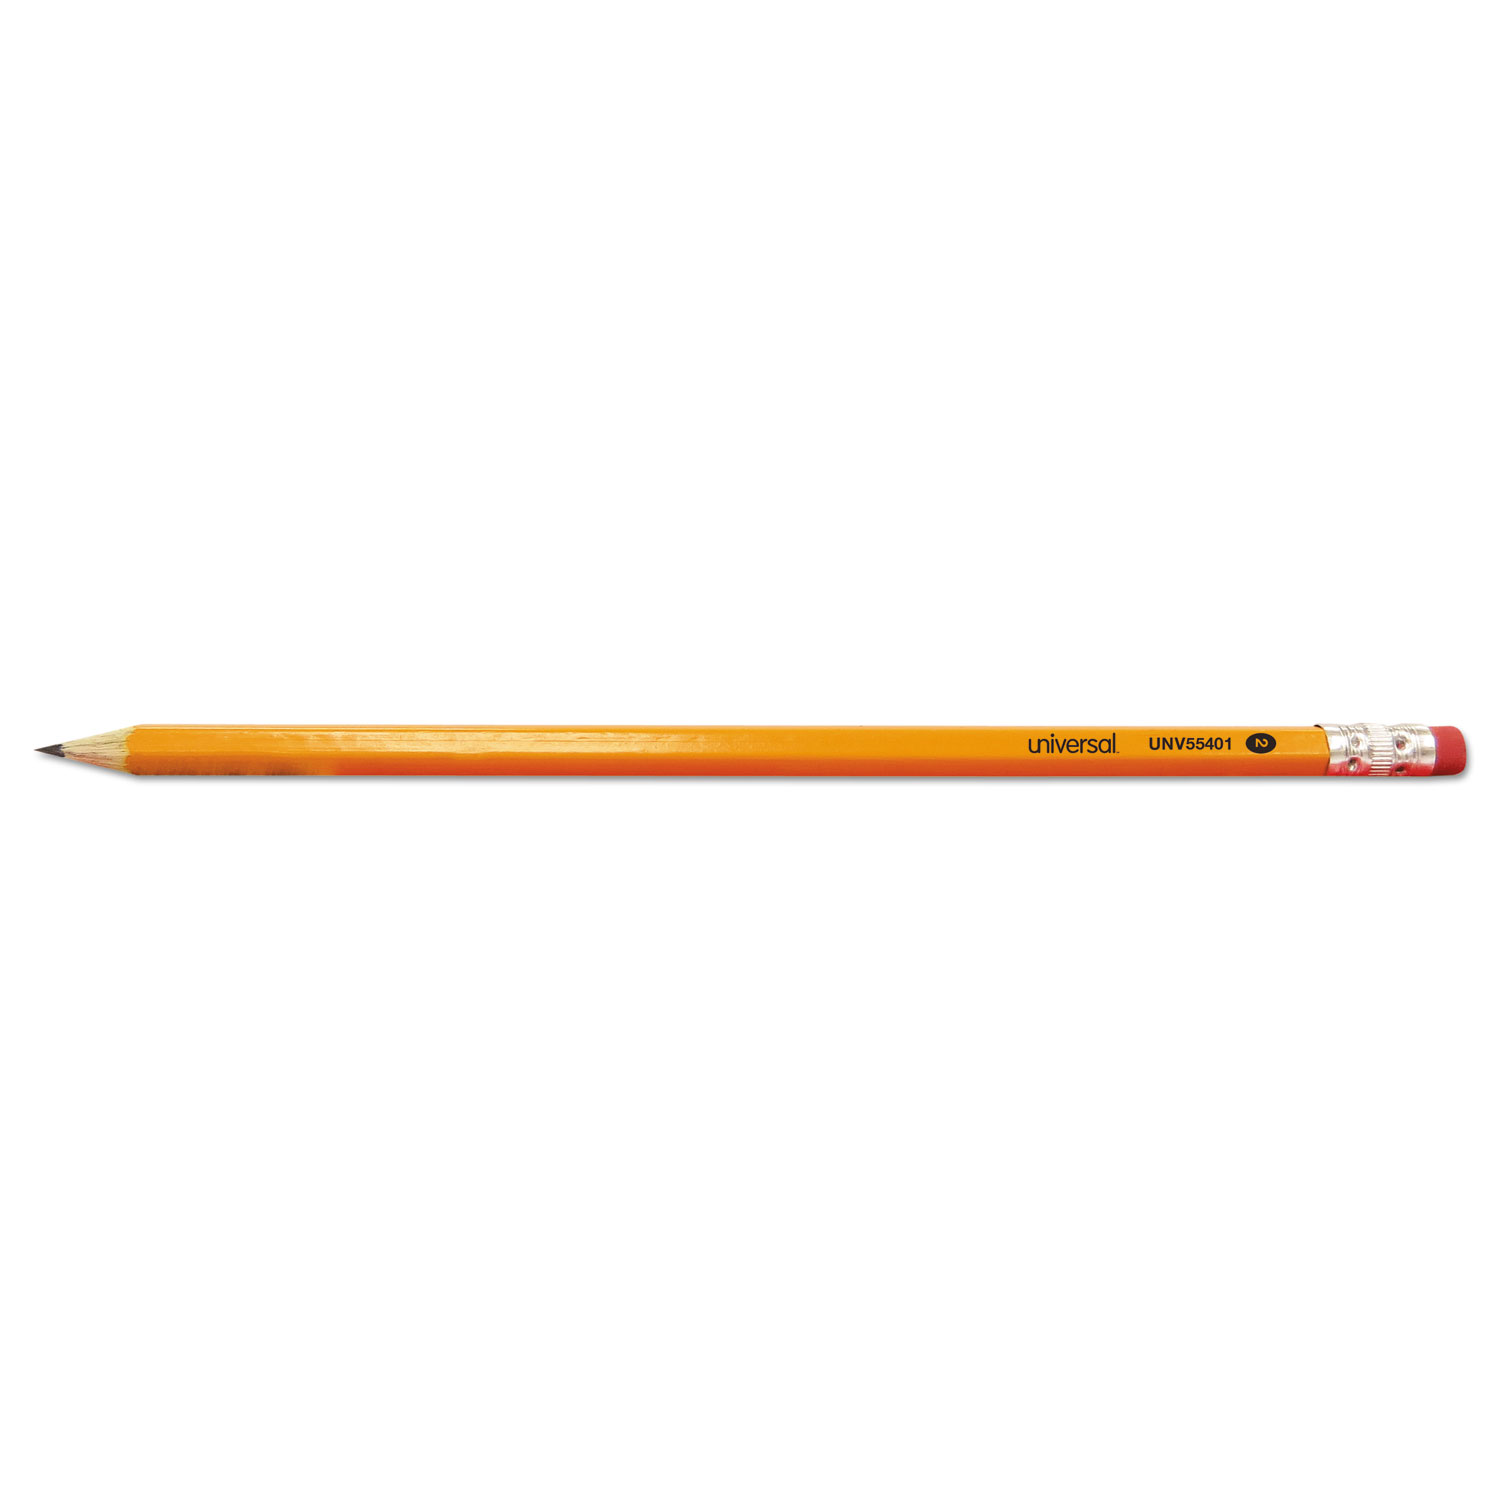  Universal UNV55401 #2 Pre-Sharpened Woodcase Pencil, HB (#2), Black Lead, Yellow Barrel, 24/Pack (UNV55401) 